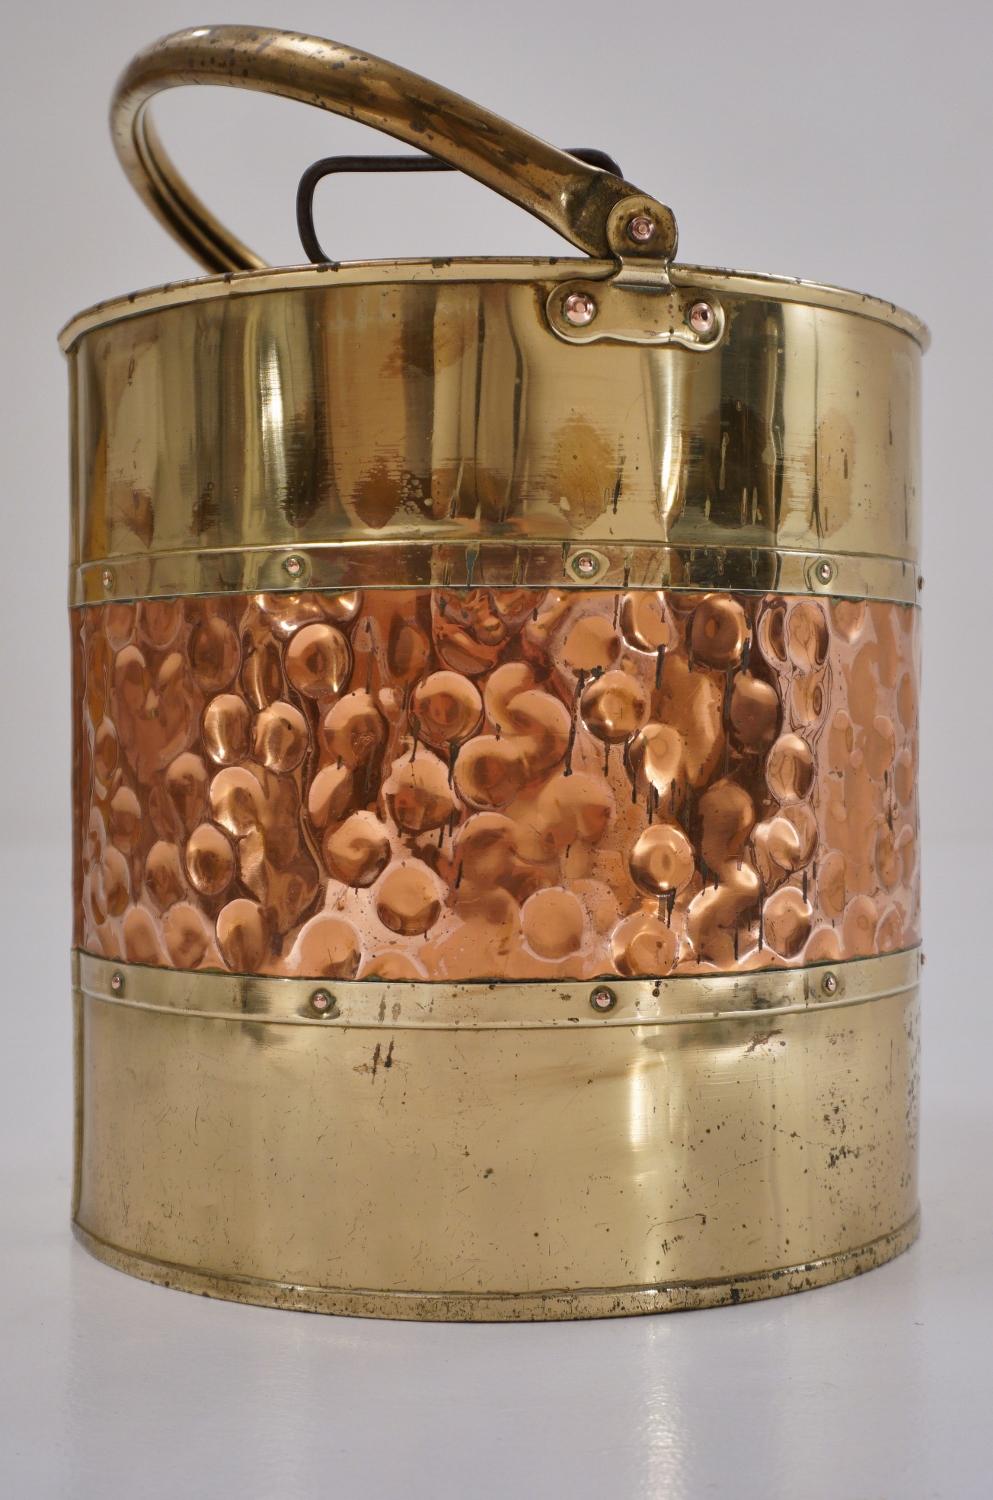 Antique Brass Bucket/Bin 'Coal Scuttle' with Copper Banding, circa 1900s English In Good Condition For Sale In London, GB